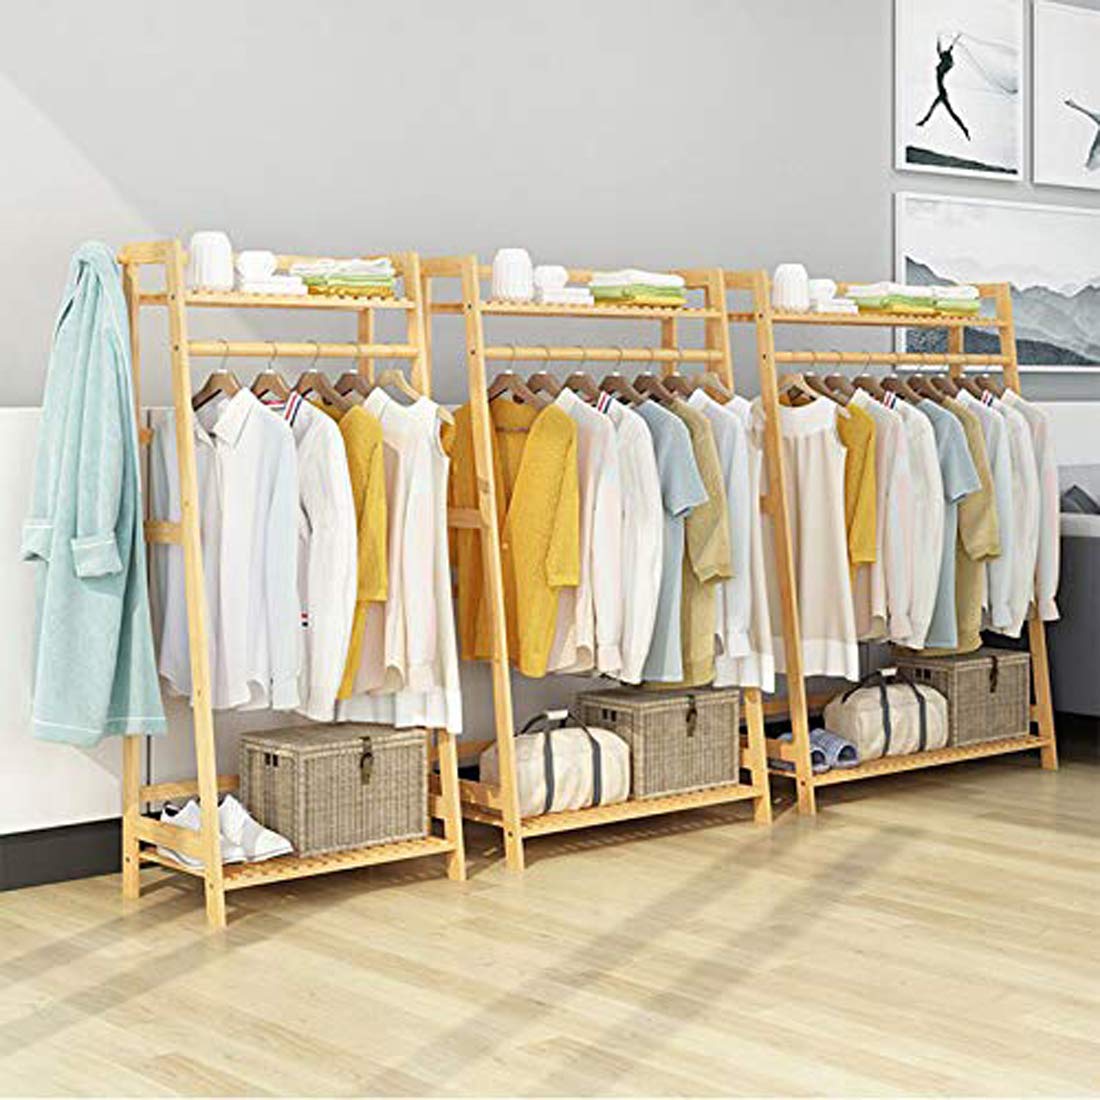 Bamboo Garment Coat Clothes Hanging Duty Rack with Top Shelf and Shoe Clothing Shelves - (80x140cm) DIY (DO-IT-Yourself)